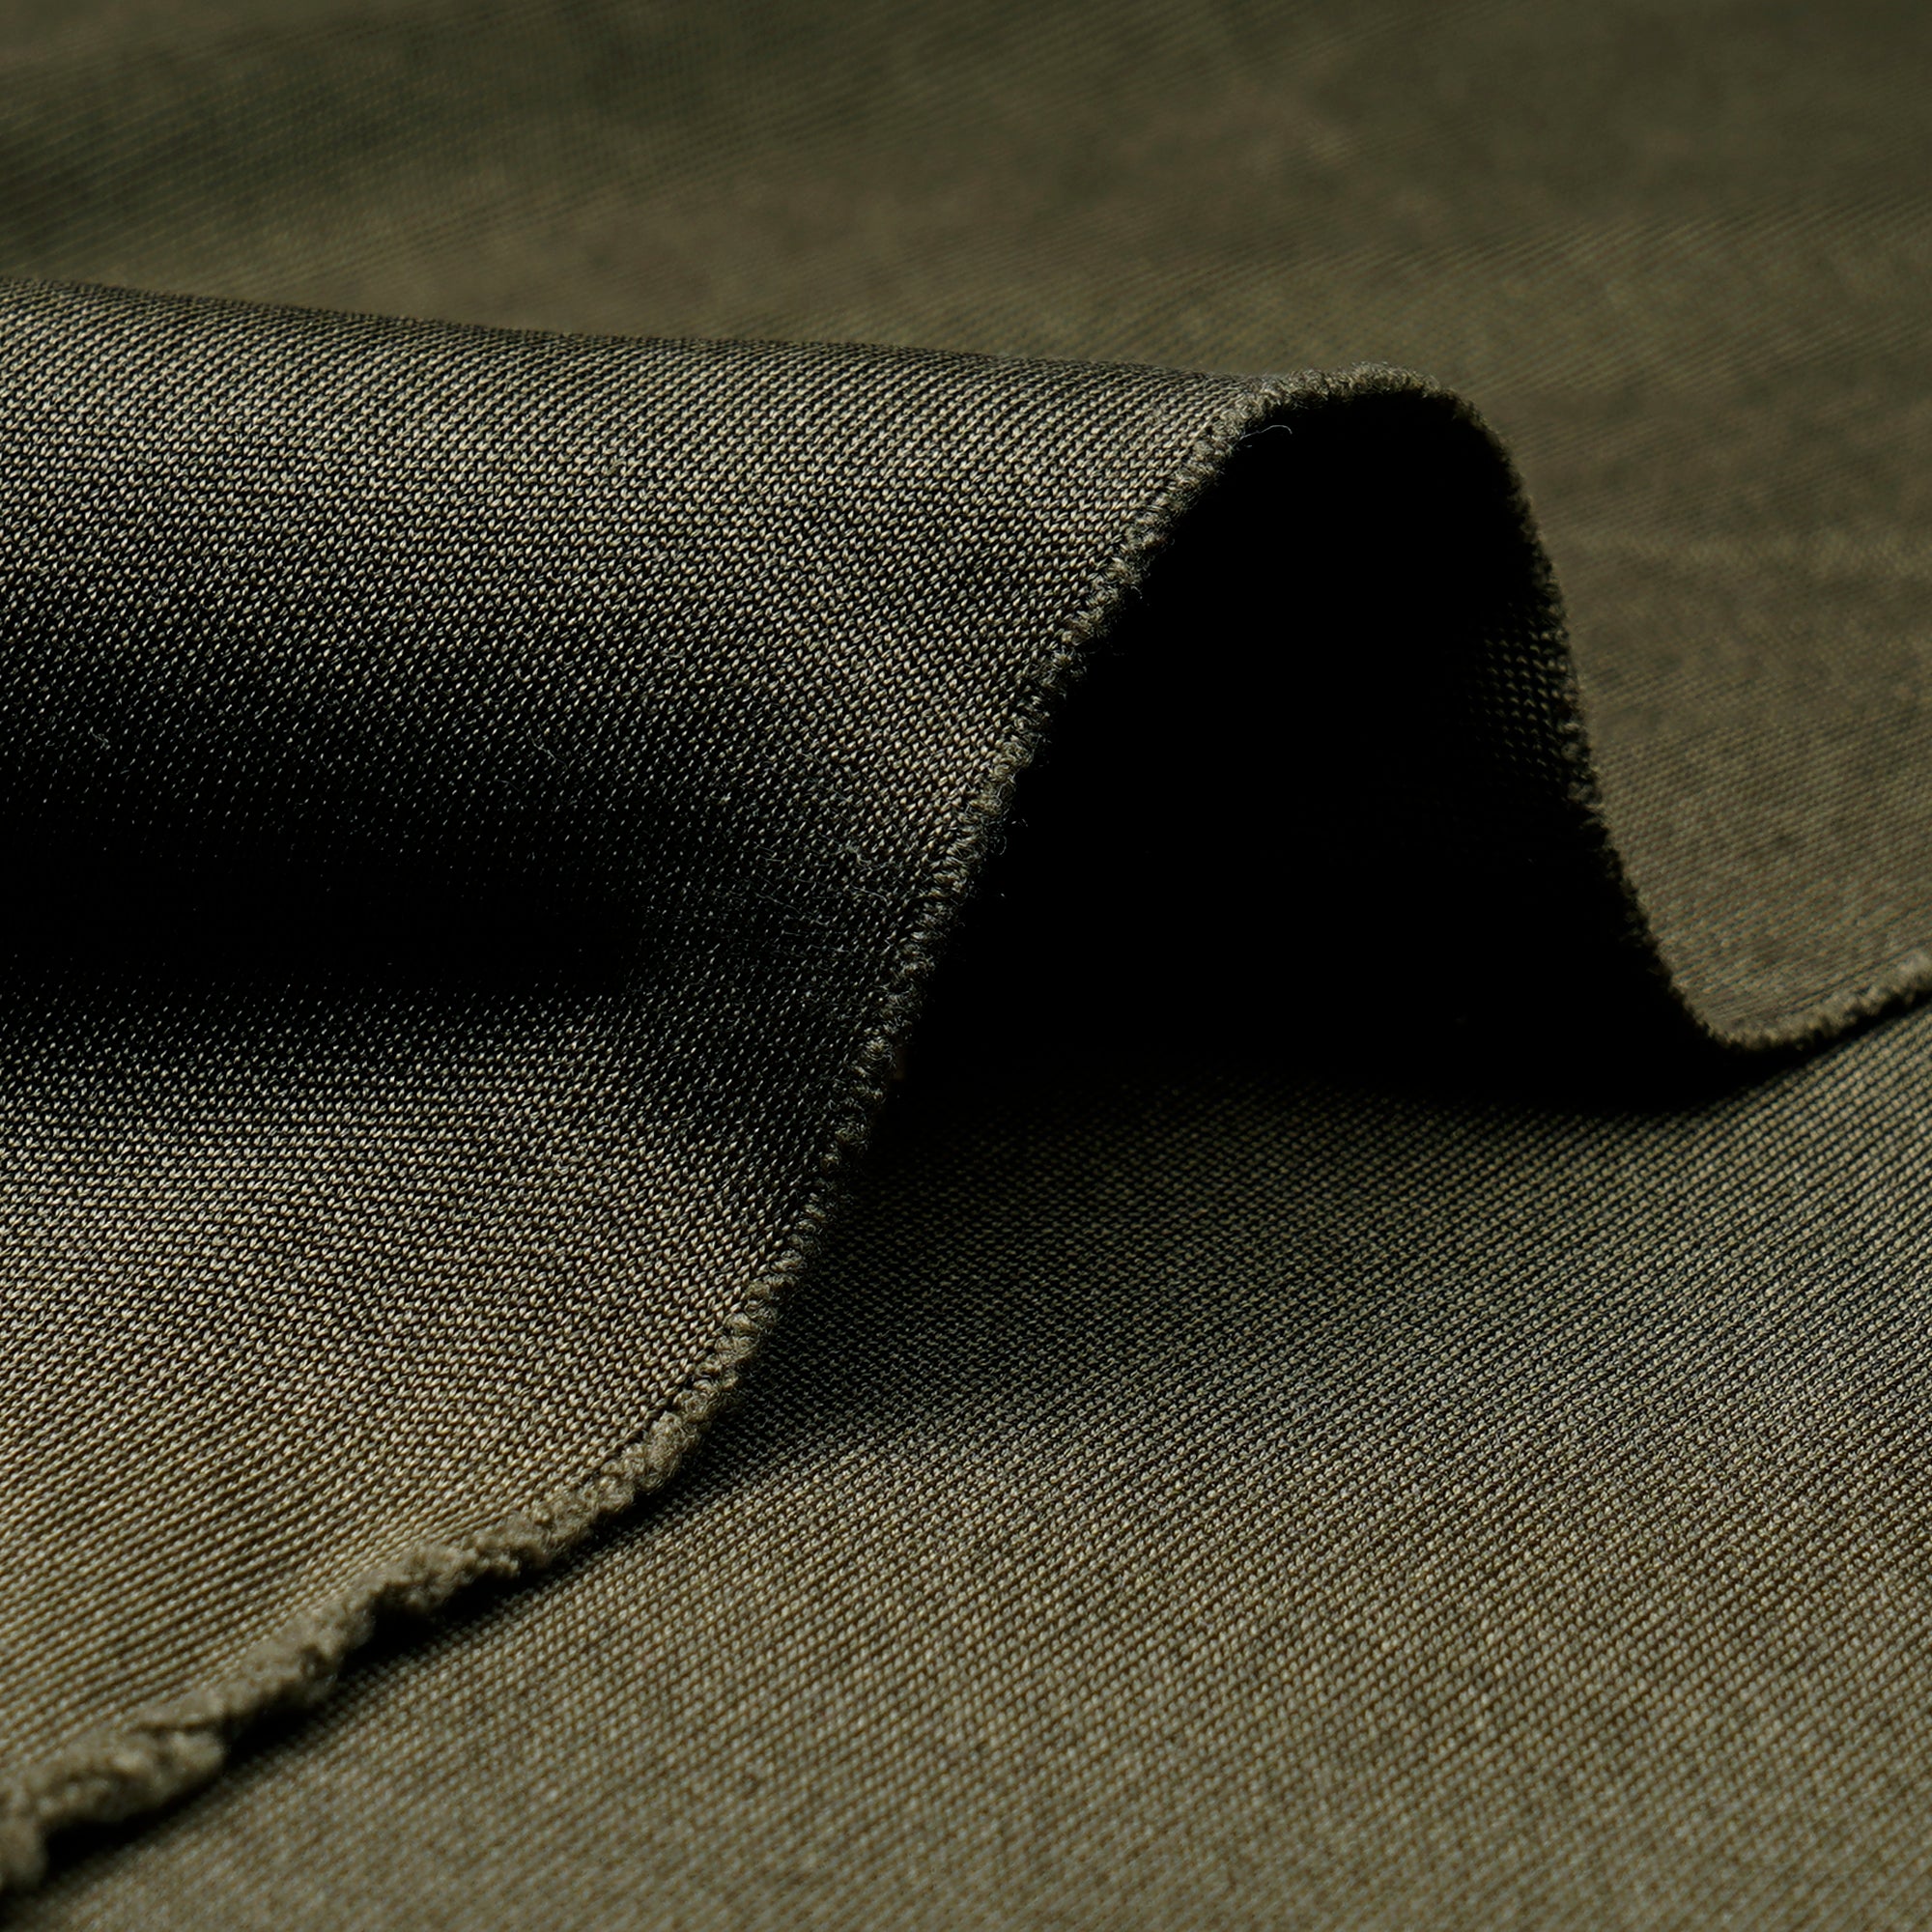 Dark Green Color Silk Knitted Fabric